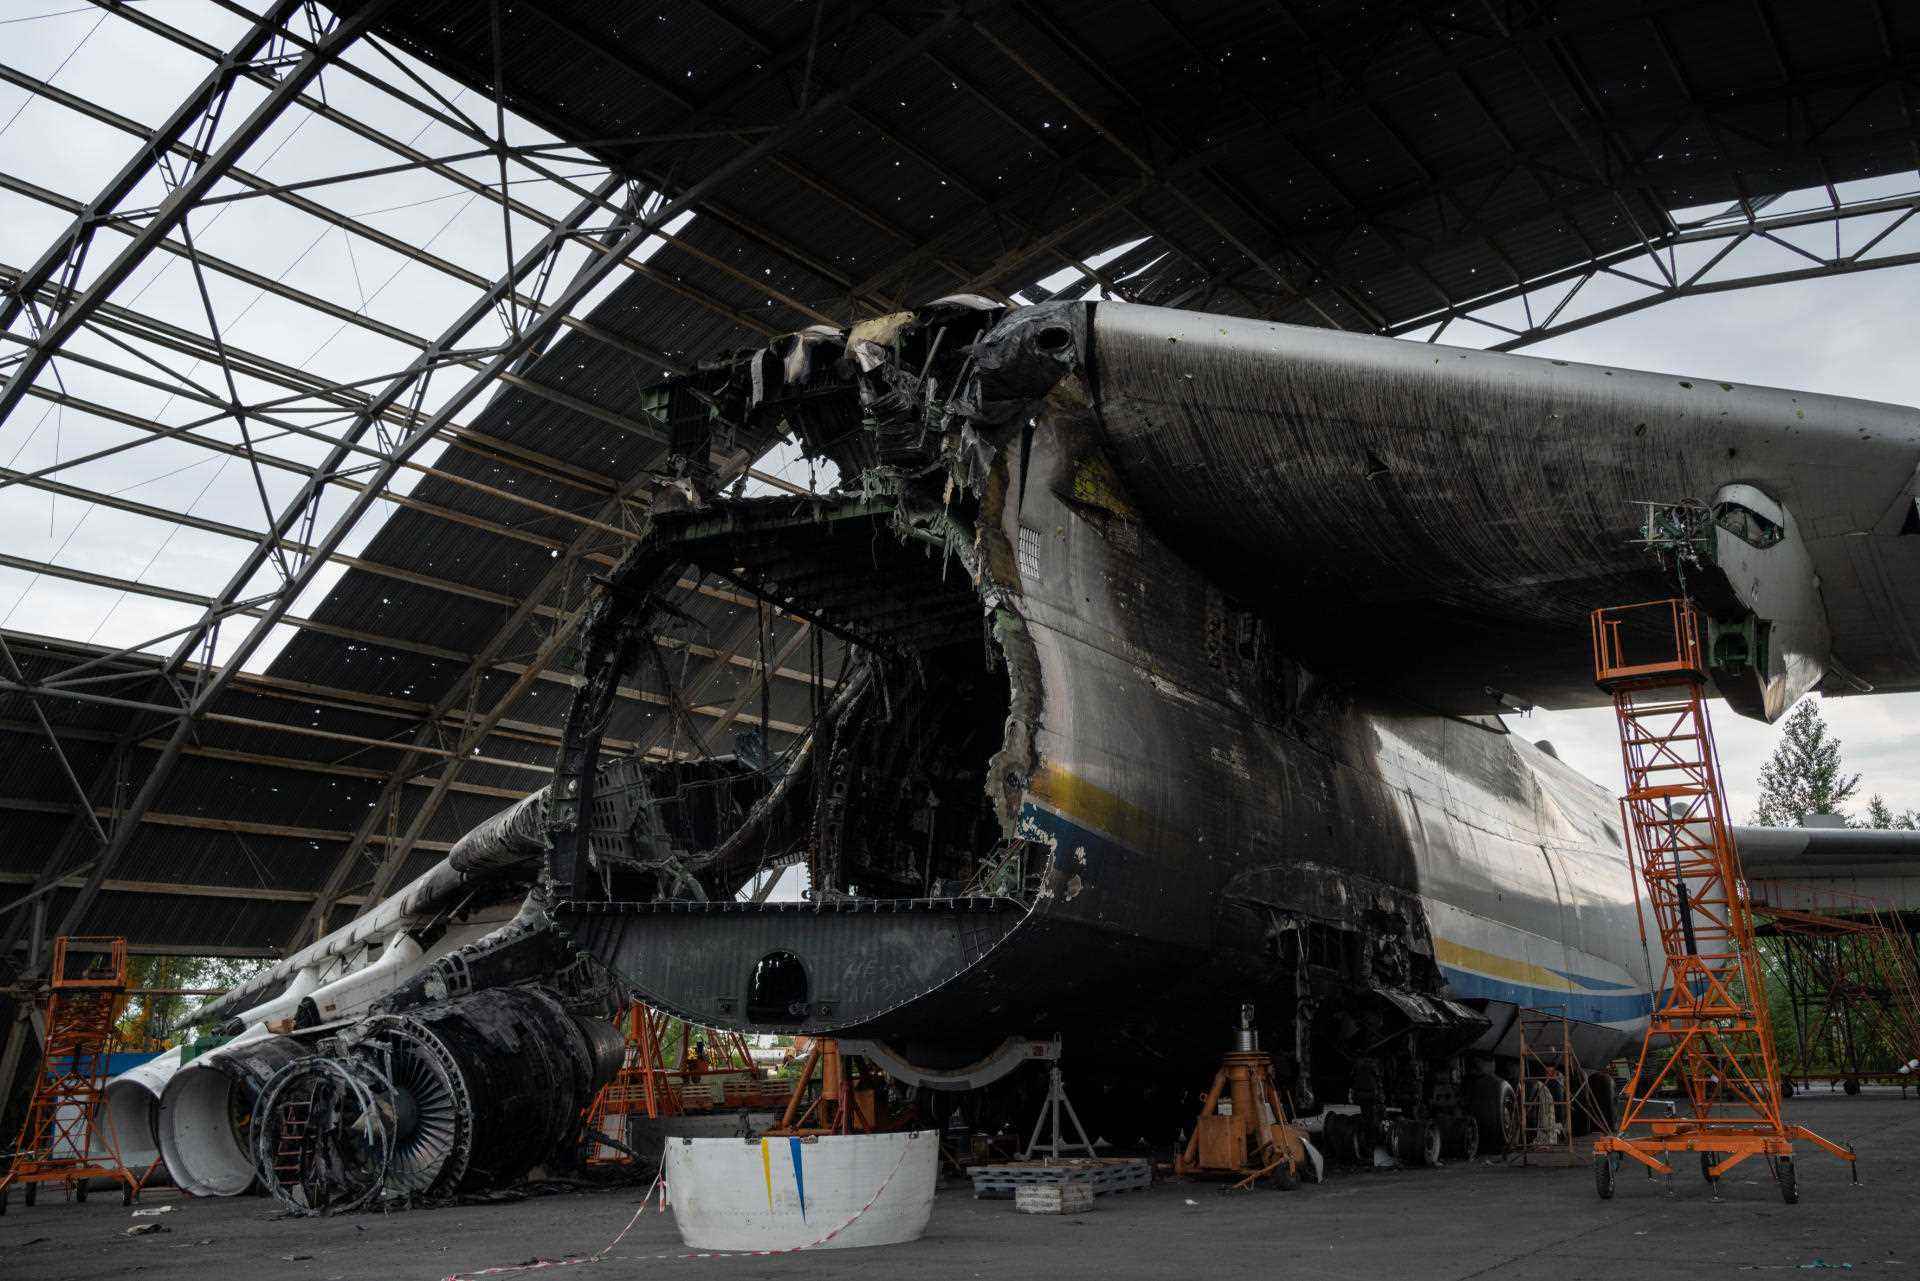 The remains of the Antonov 225 cargo plane lie on the military airfield in Hostomel (kyiv region), July 11, 2022.